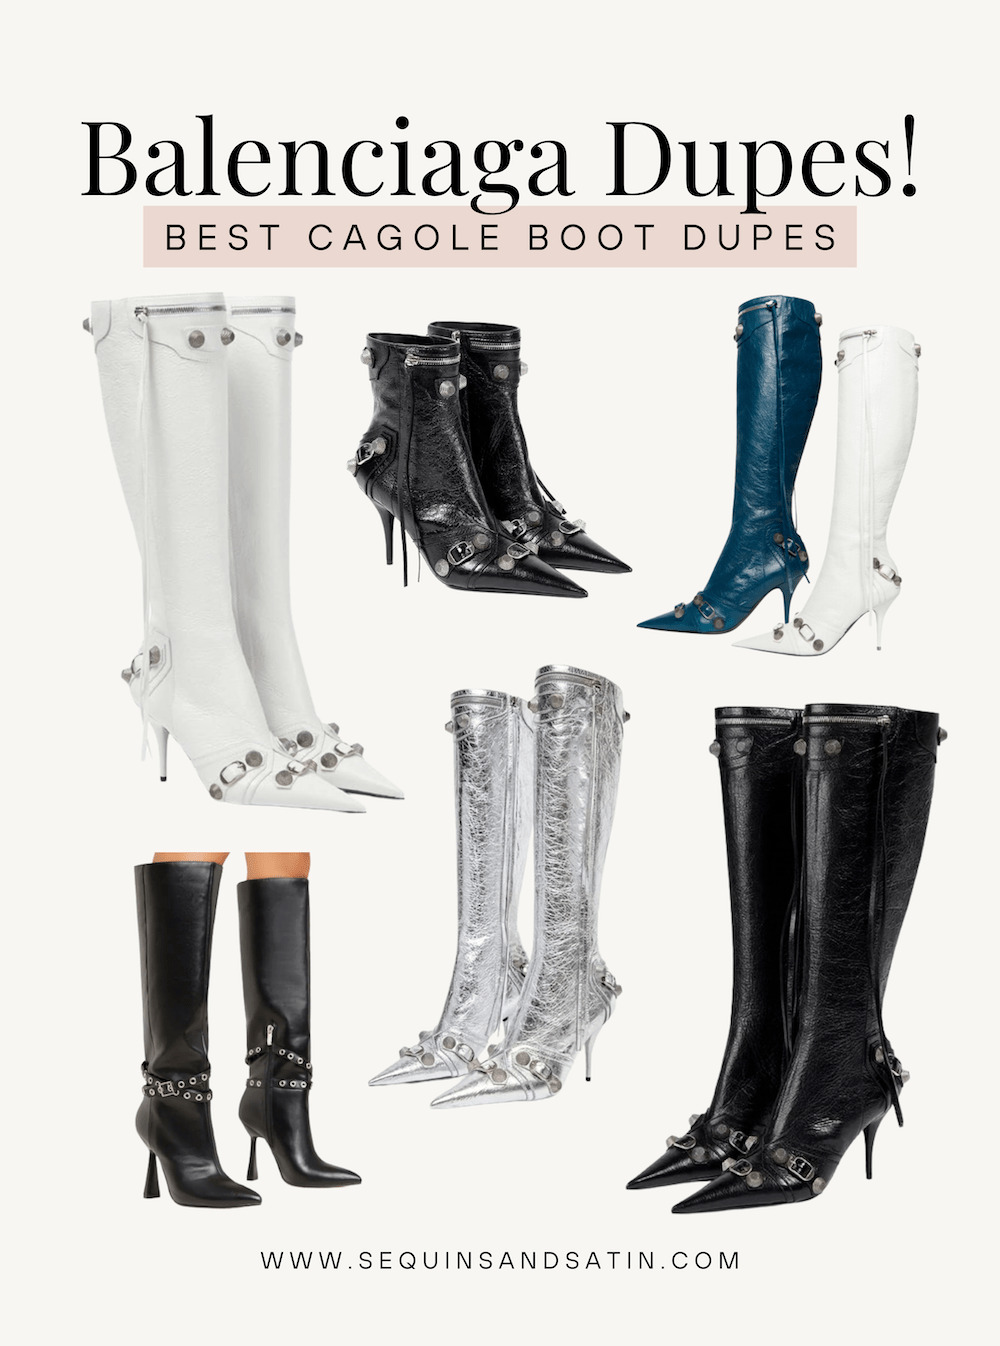 Best Balenciaga Cagole boots dupes